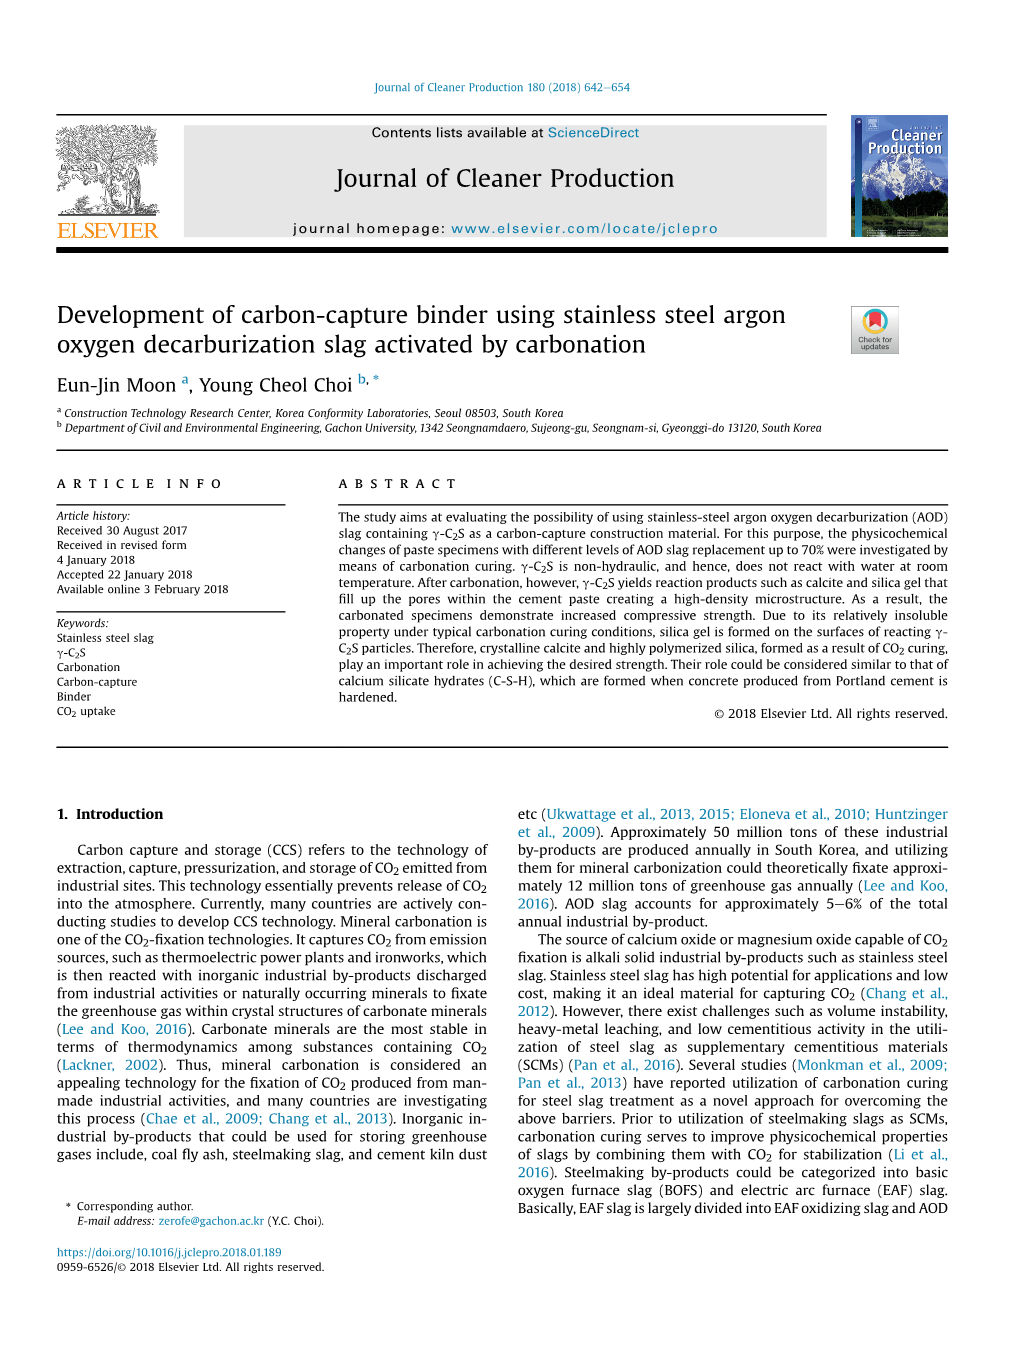 Development of Carbon-Capture Binder Using Stainless Steel Argon Oxygen Decarburization Slag Activated by Carbonation